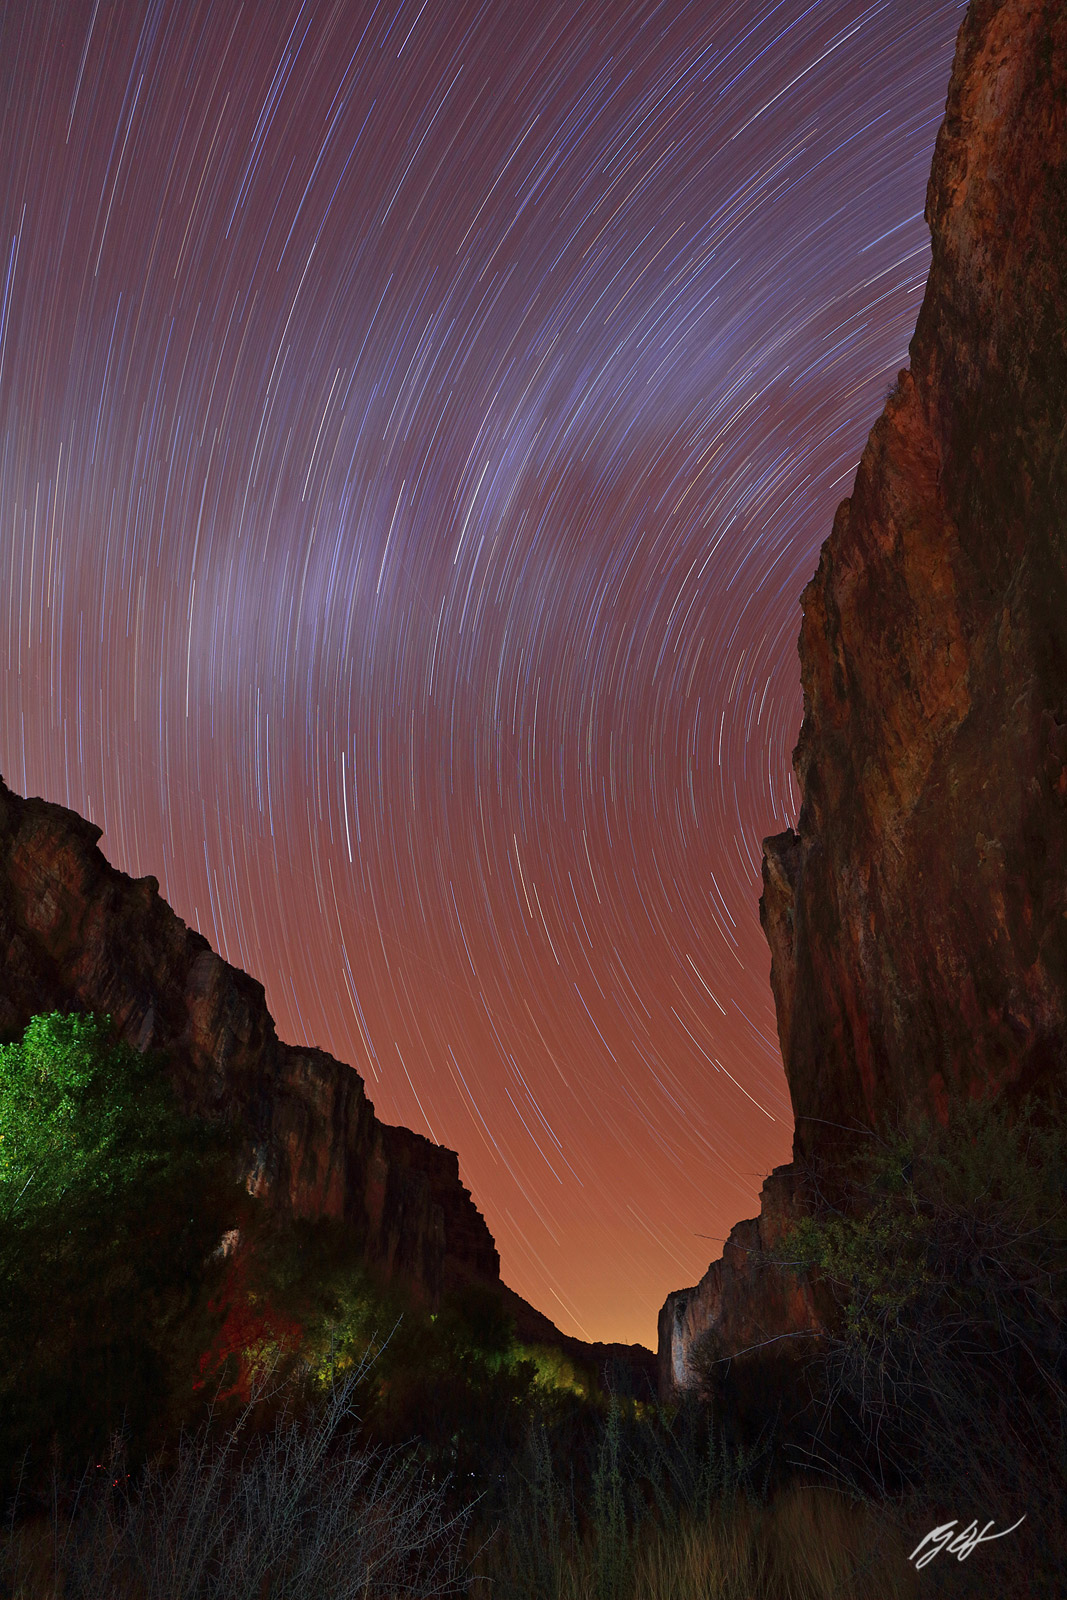 Star Trails and Camp Glow in Havasu Canyon on the Havasupai Indian Reservation in Arizona